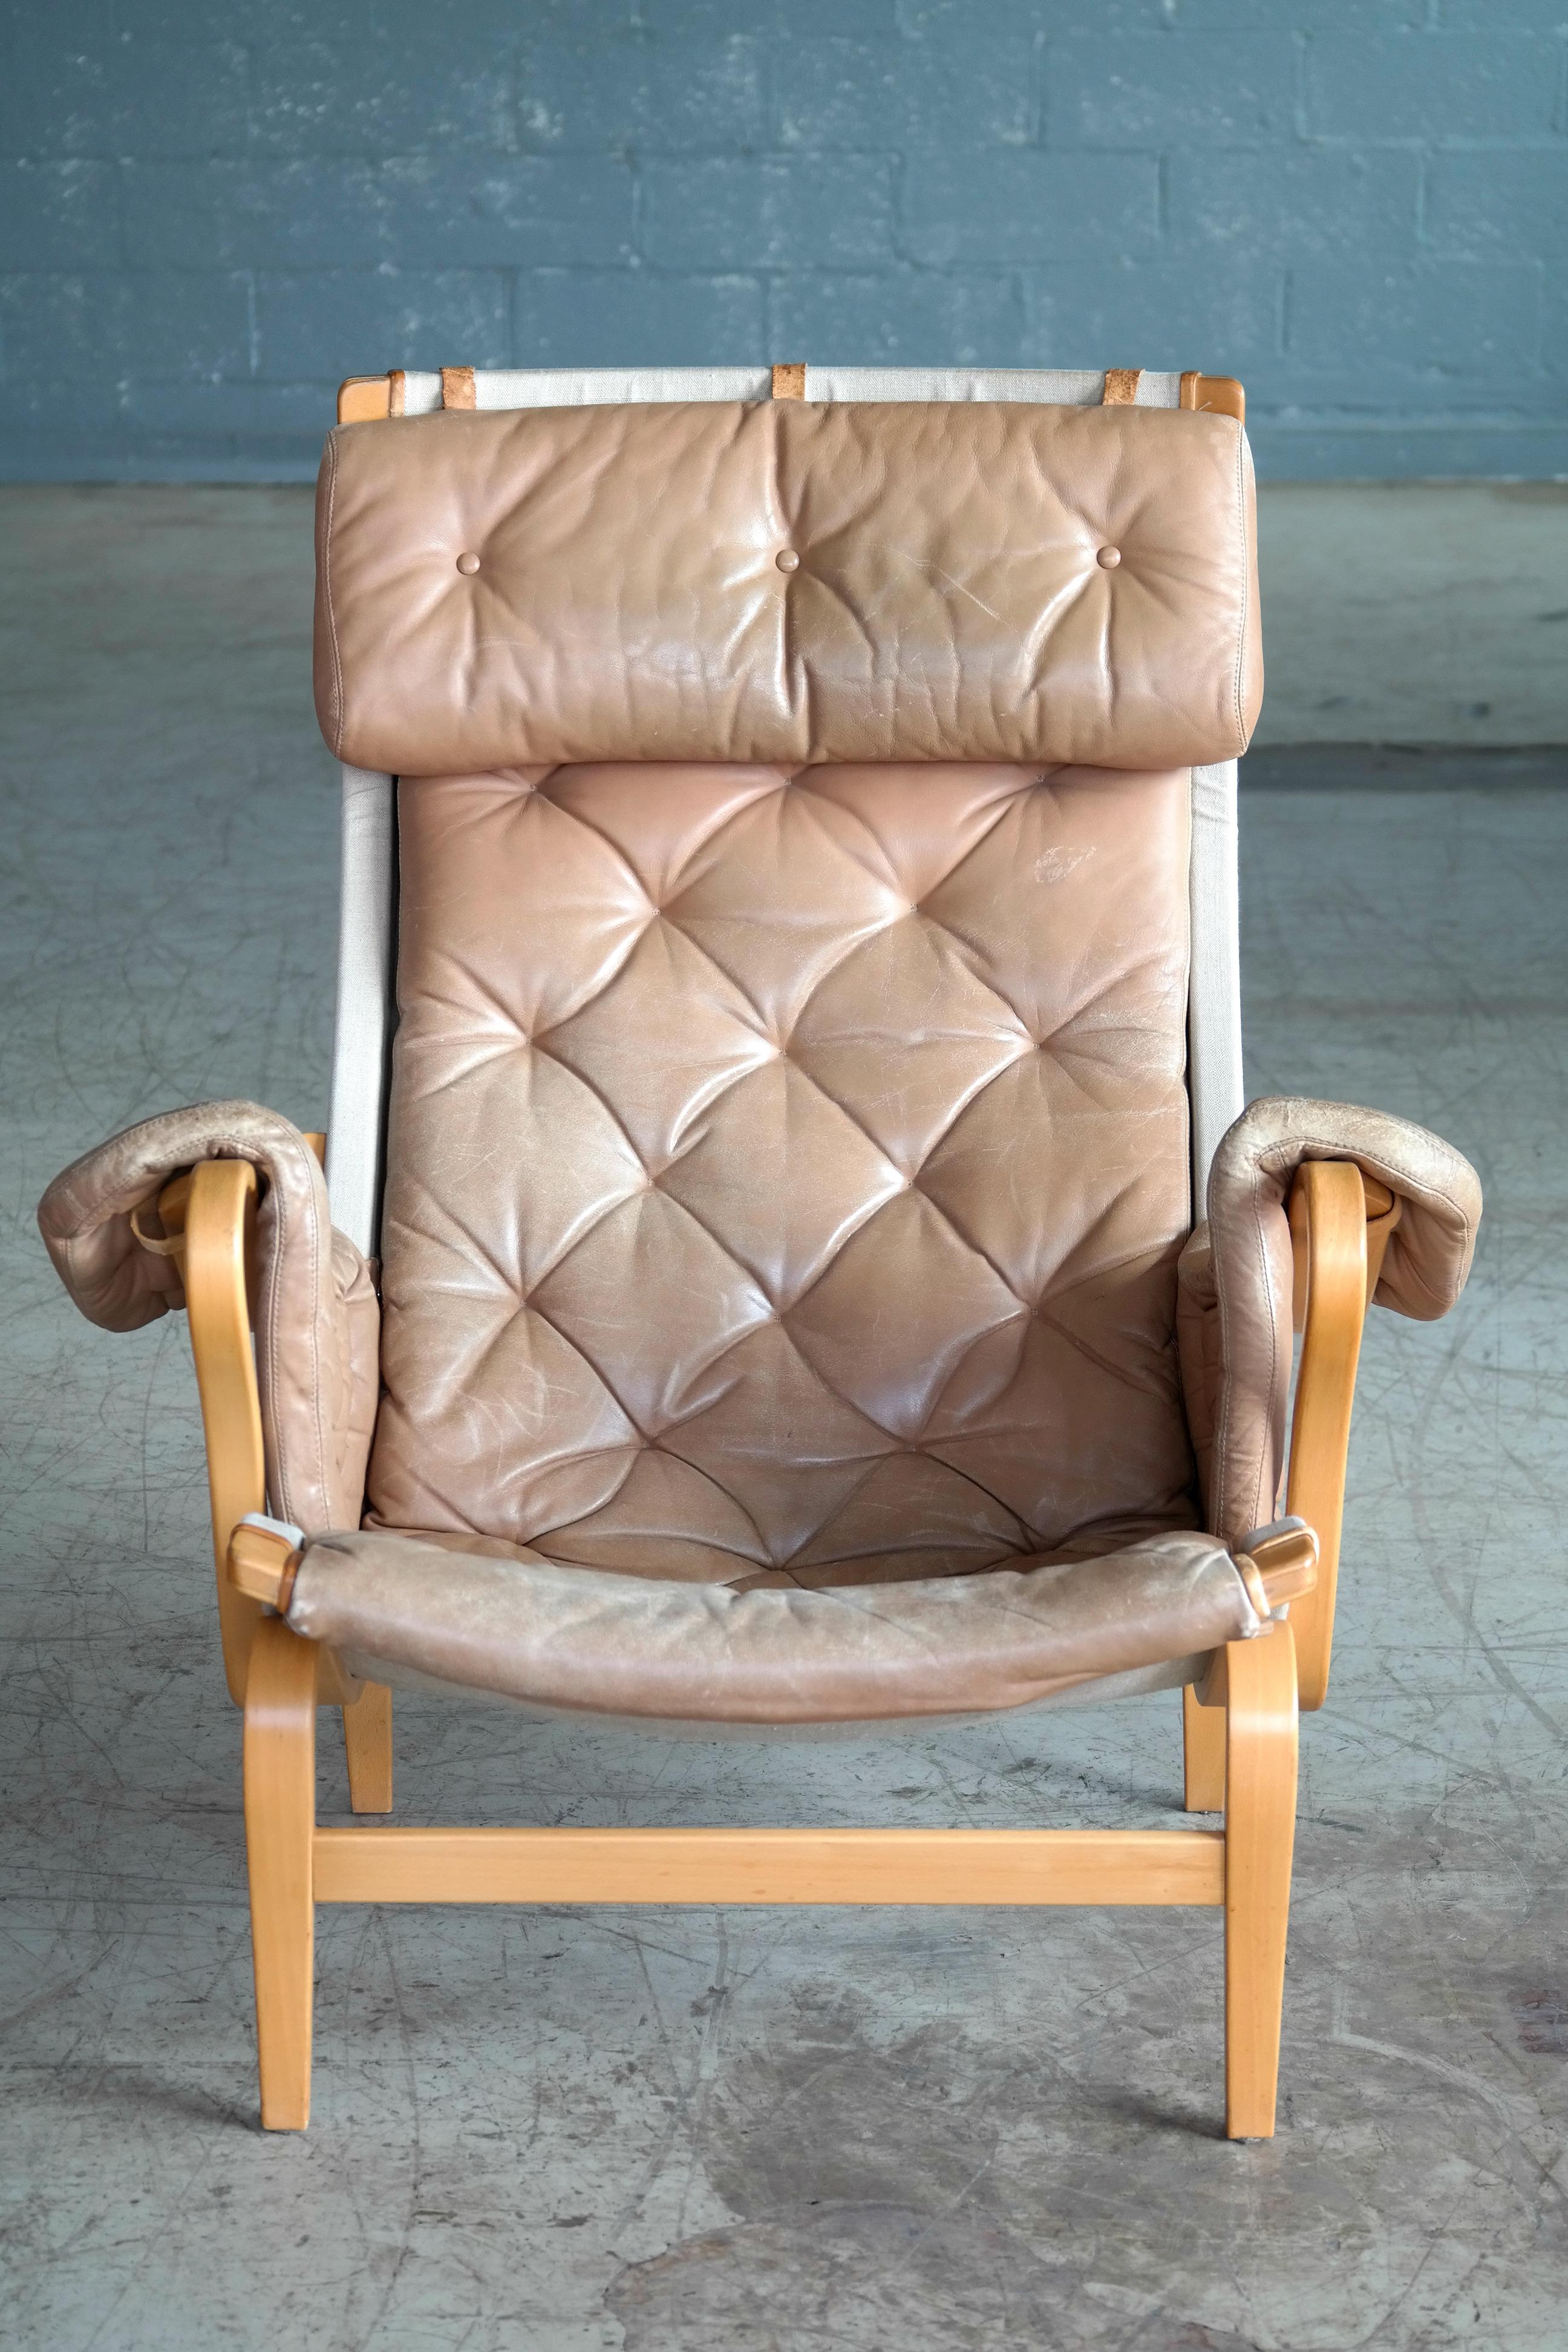 Wonderful Pernilla chair by Bruno Mathsson for DUX, composed of a tufted camel color leather cover on canvas on a molded beech plywood frame, with adjustable leather headrest on leather straps. One of the most comfortable chairs ever made and super